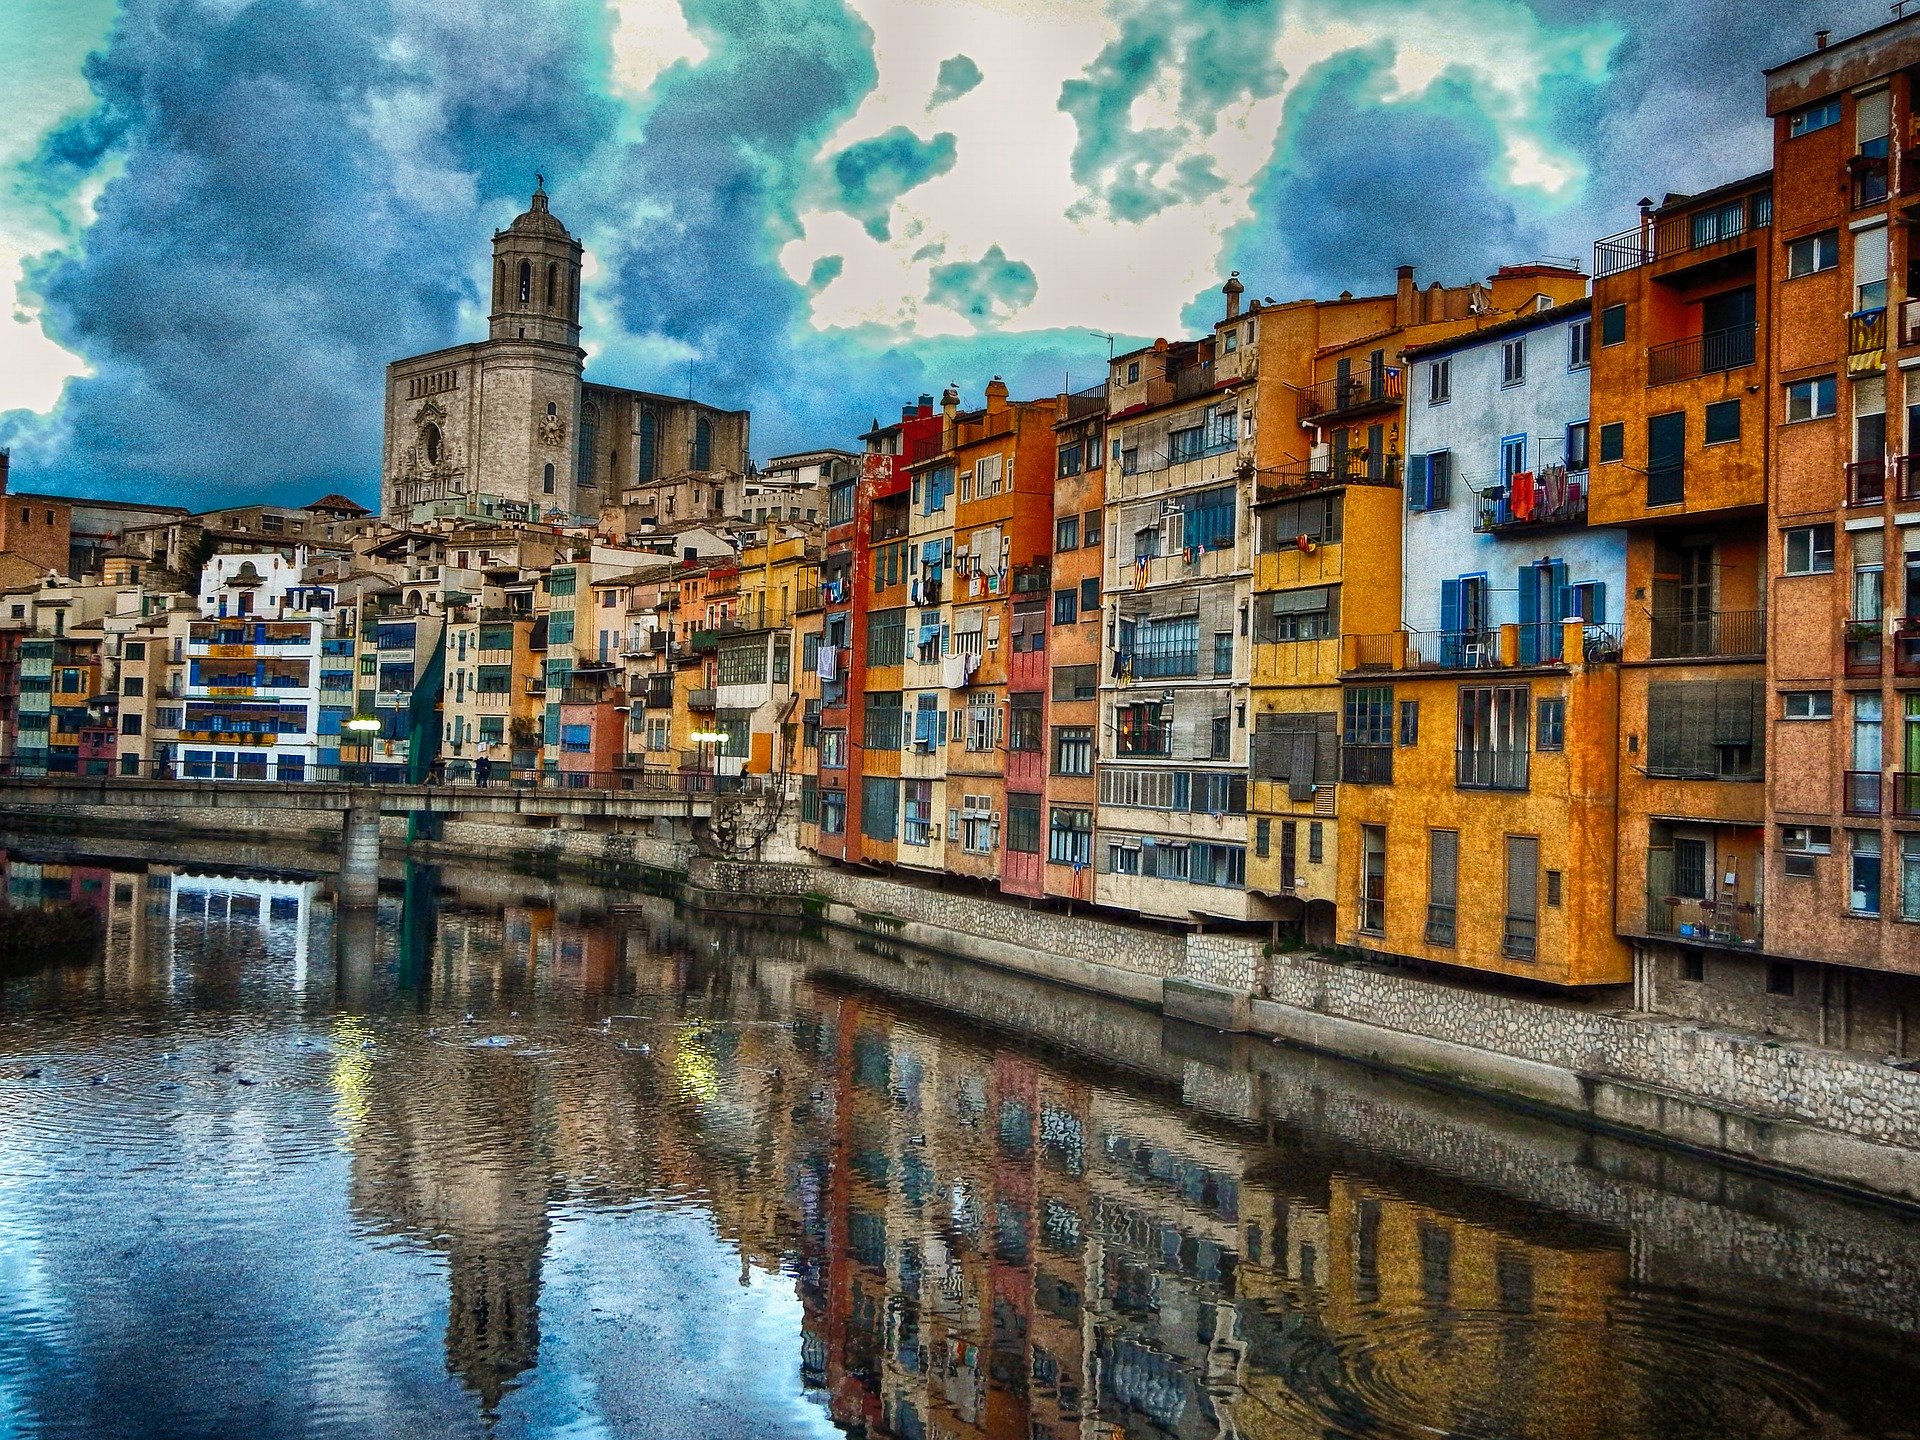 How To Get From Girona Airport To City Center - All Possible Ways